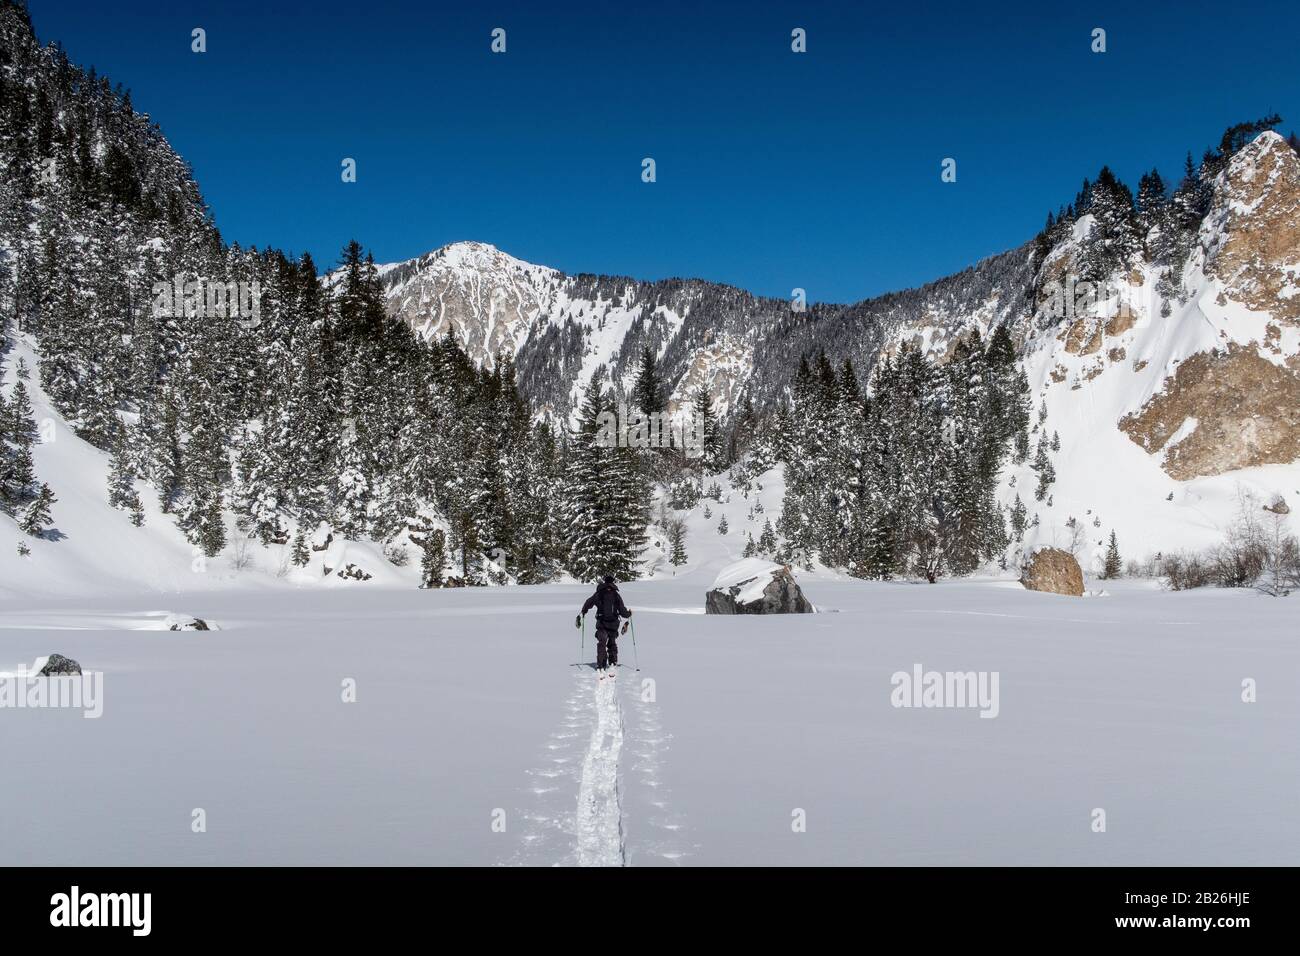 A man ski tours through the Vallée des Avals near the French alpine resort of Courchevel after fresh snowfall on a sunny day. Stock Photo